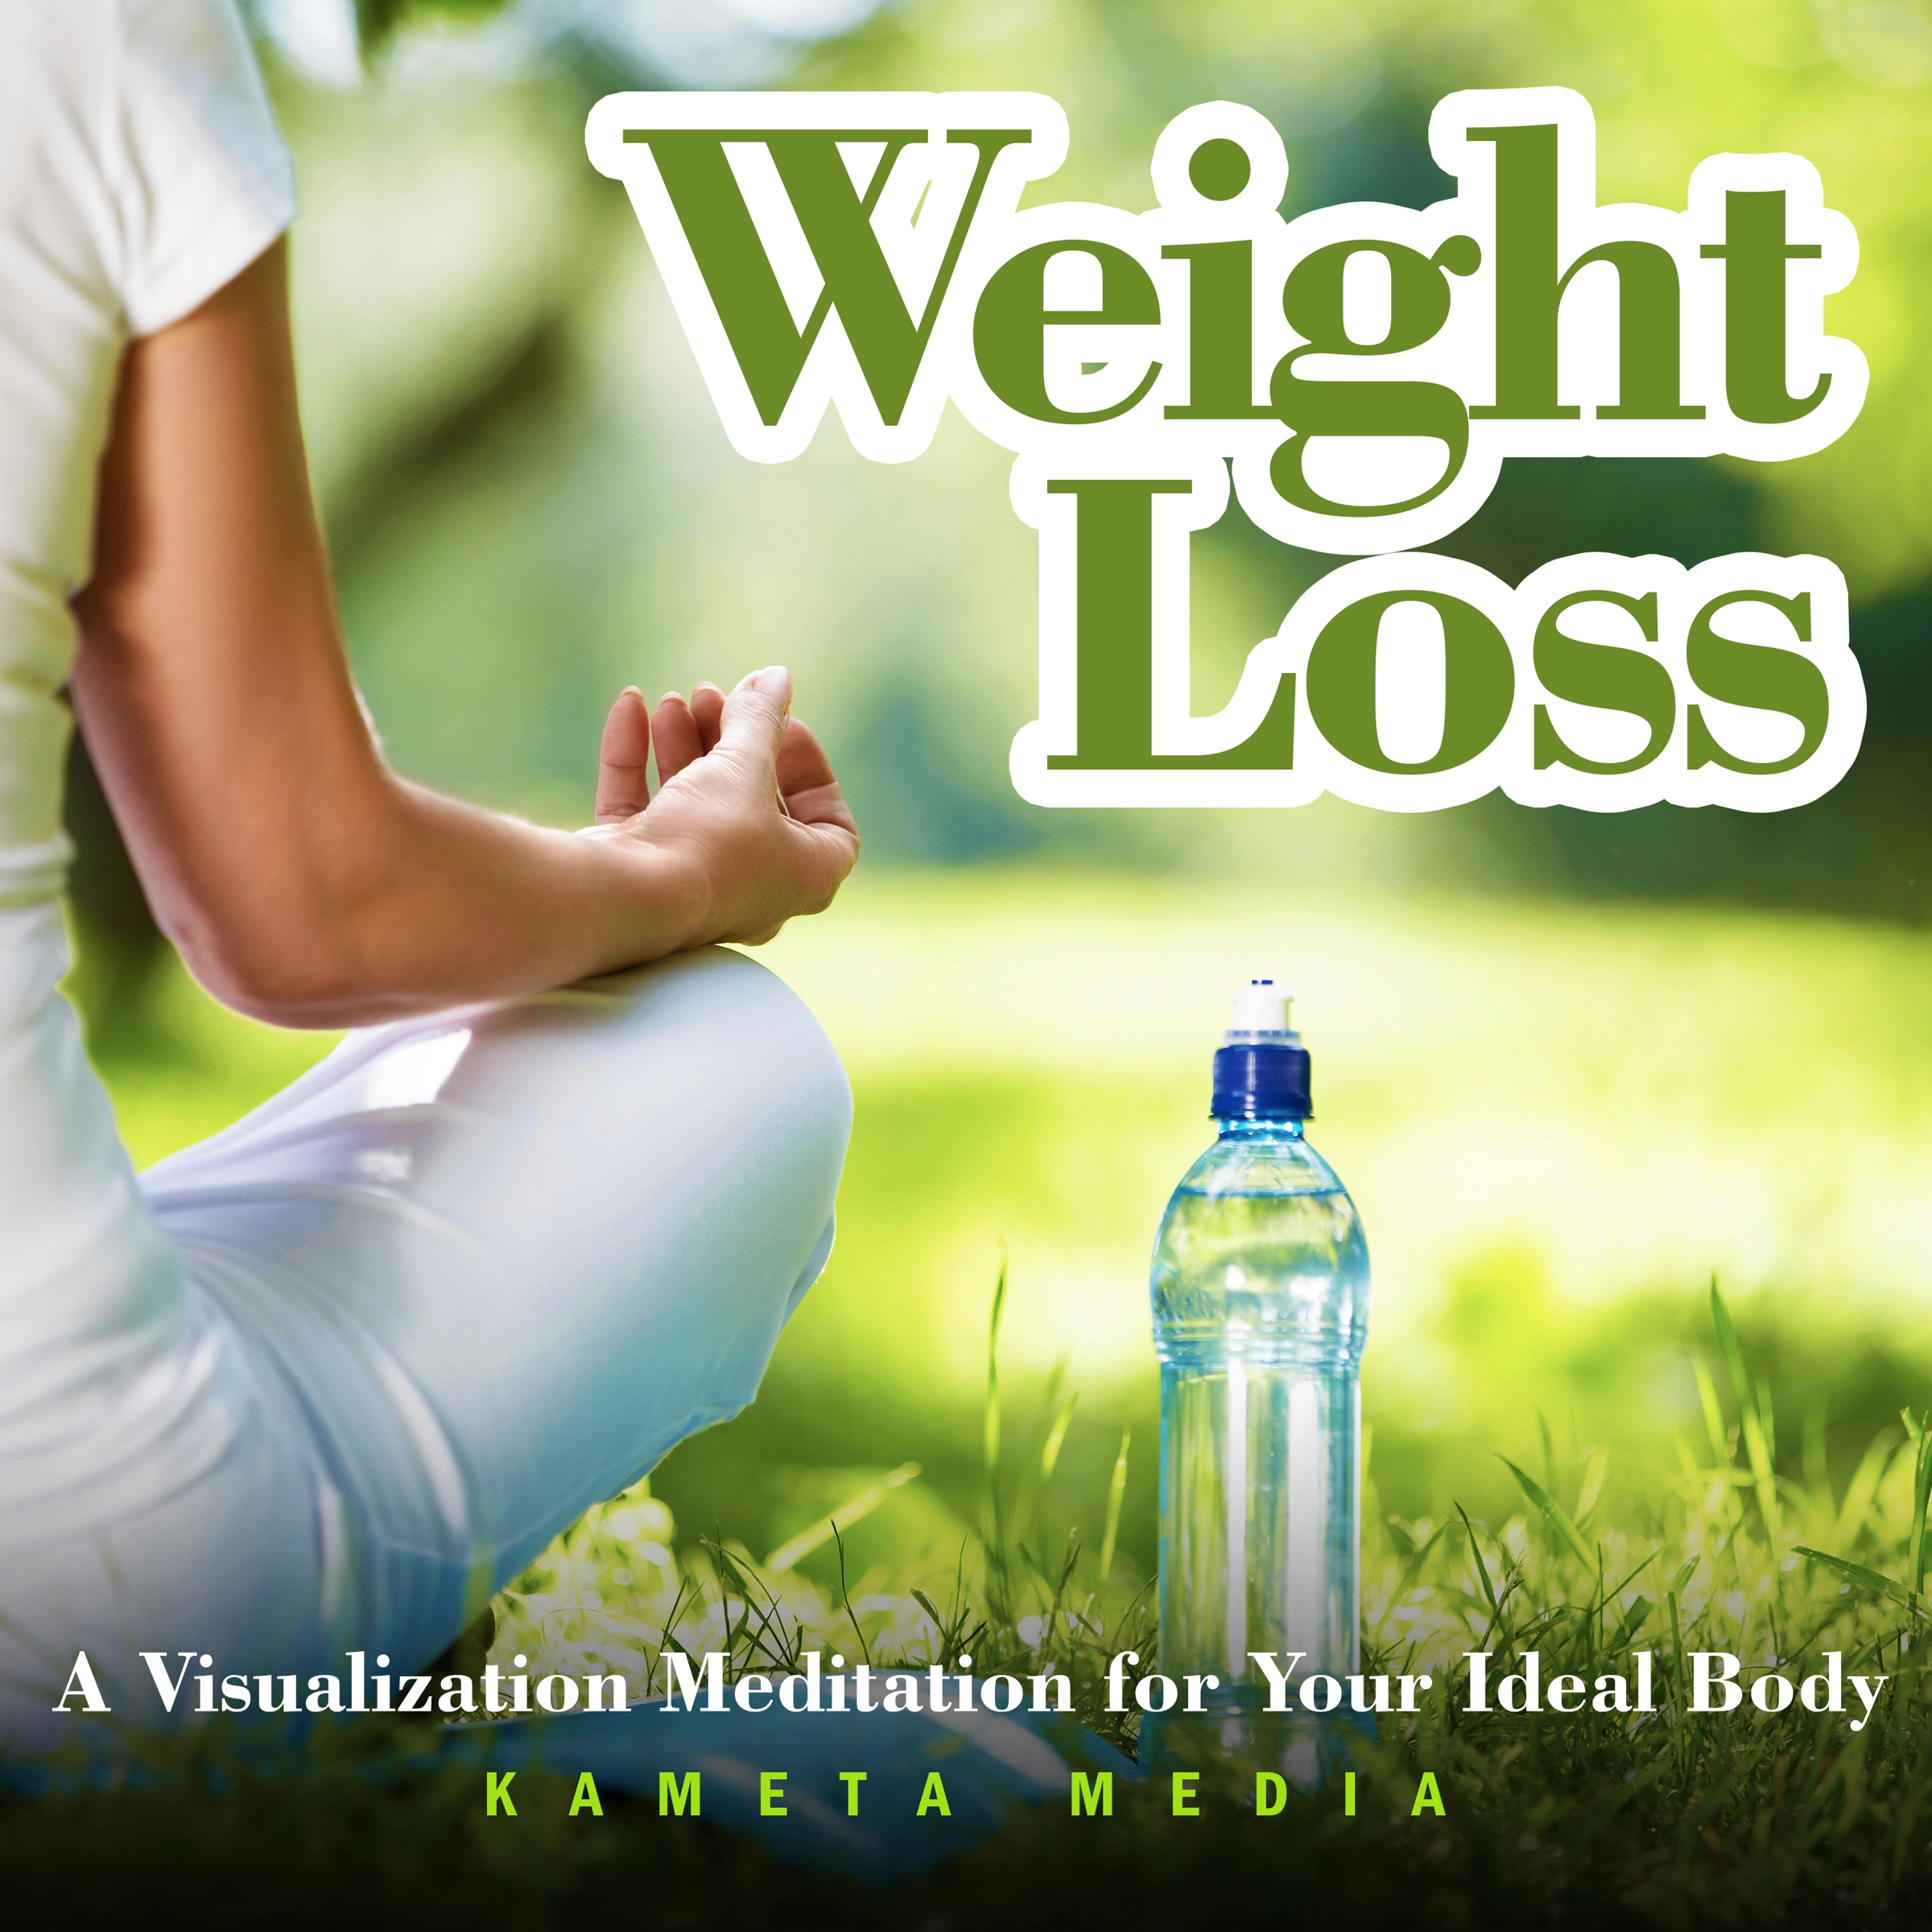 Weight Loss: A Visualization Meditation for Your Ideal Body by Kameta Media